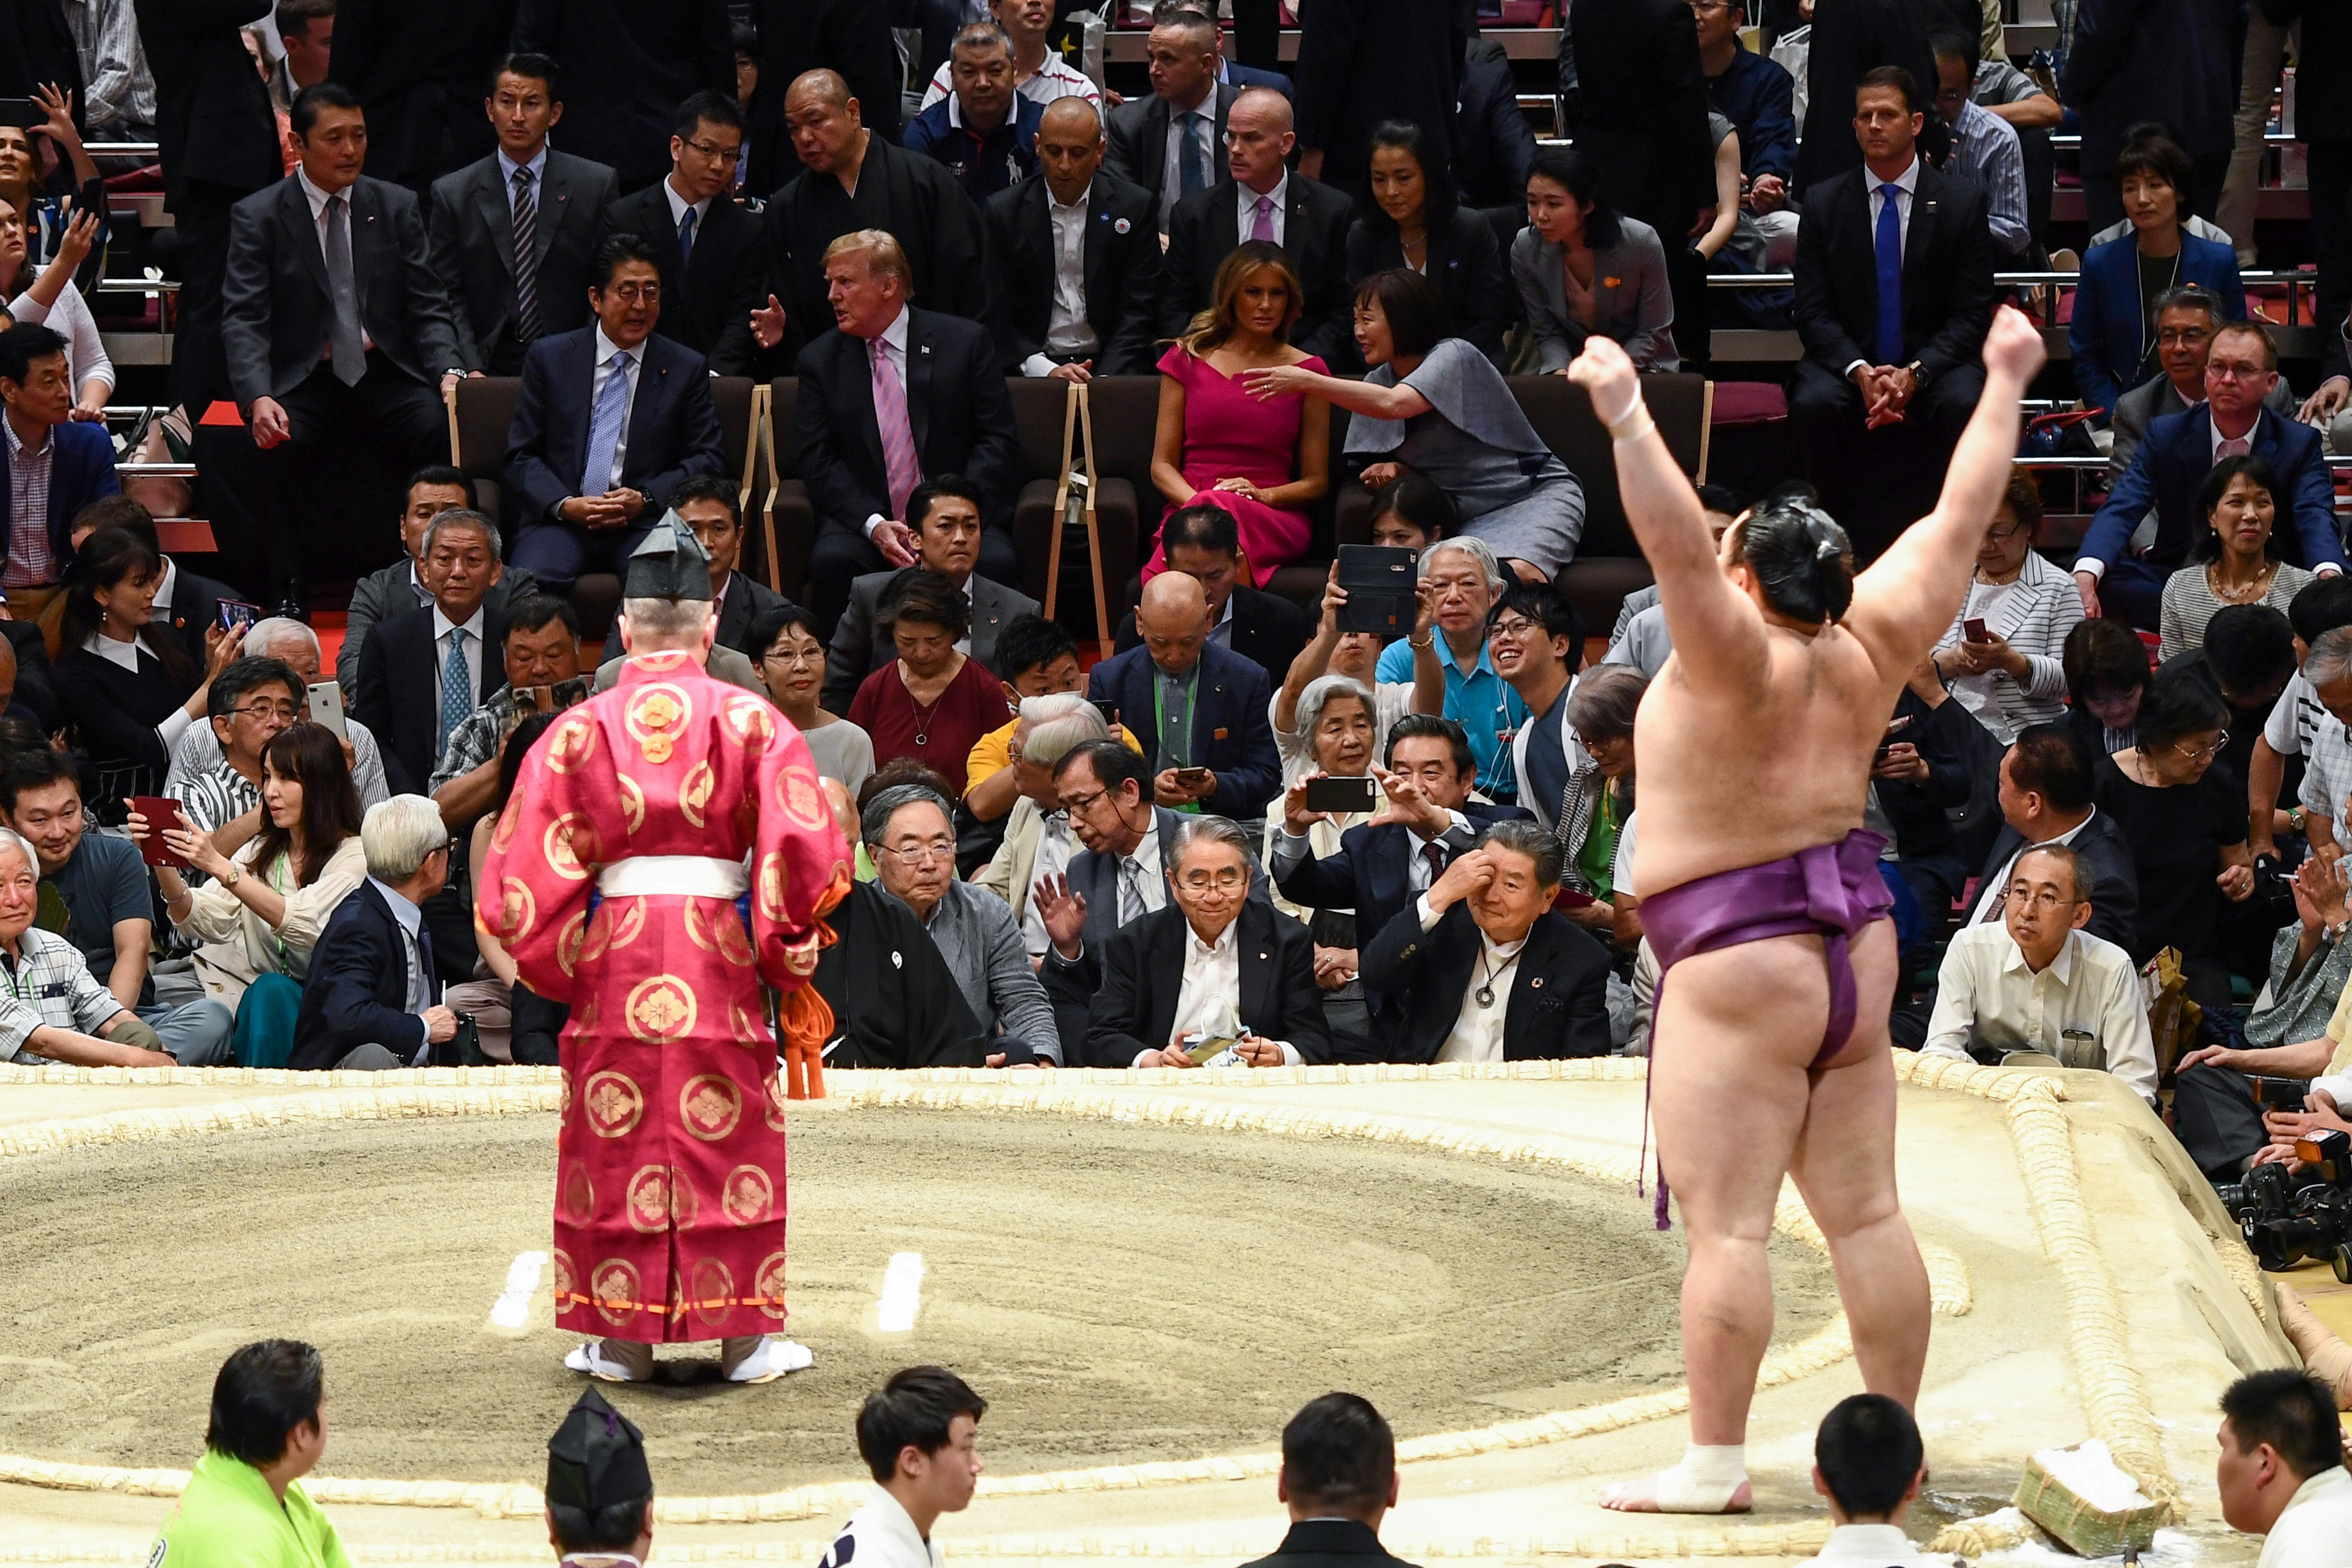 US President Donald Trump and First Lady Melania Trump are accompanied by Japan's Prime Minister Shinzo Abe and his wife Akie Abe (centre row) as they watch a sumo battle during the Summer Grand Sumo Tournament in Tokyo on May 26, 2019. BRENDAN SMIALOWSKI/AFP/Getty Images